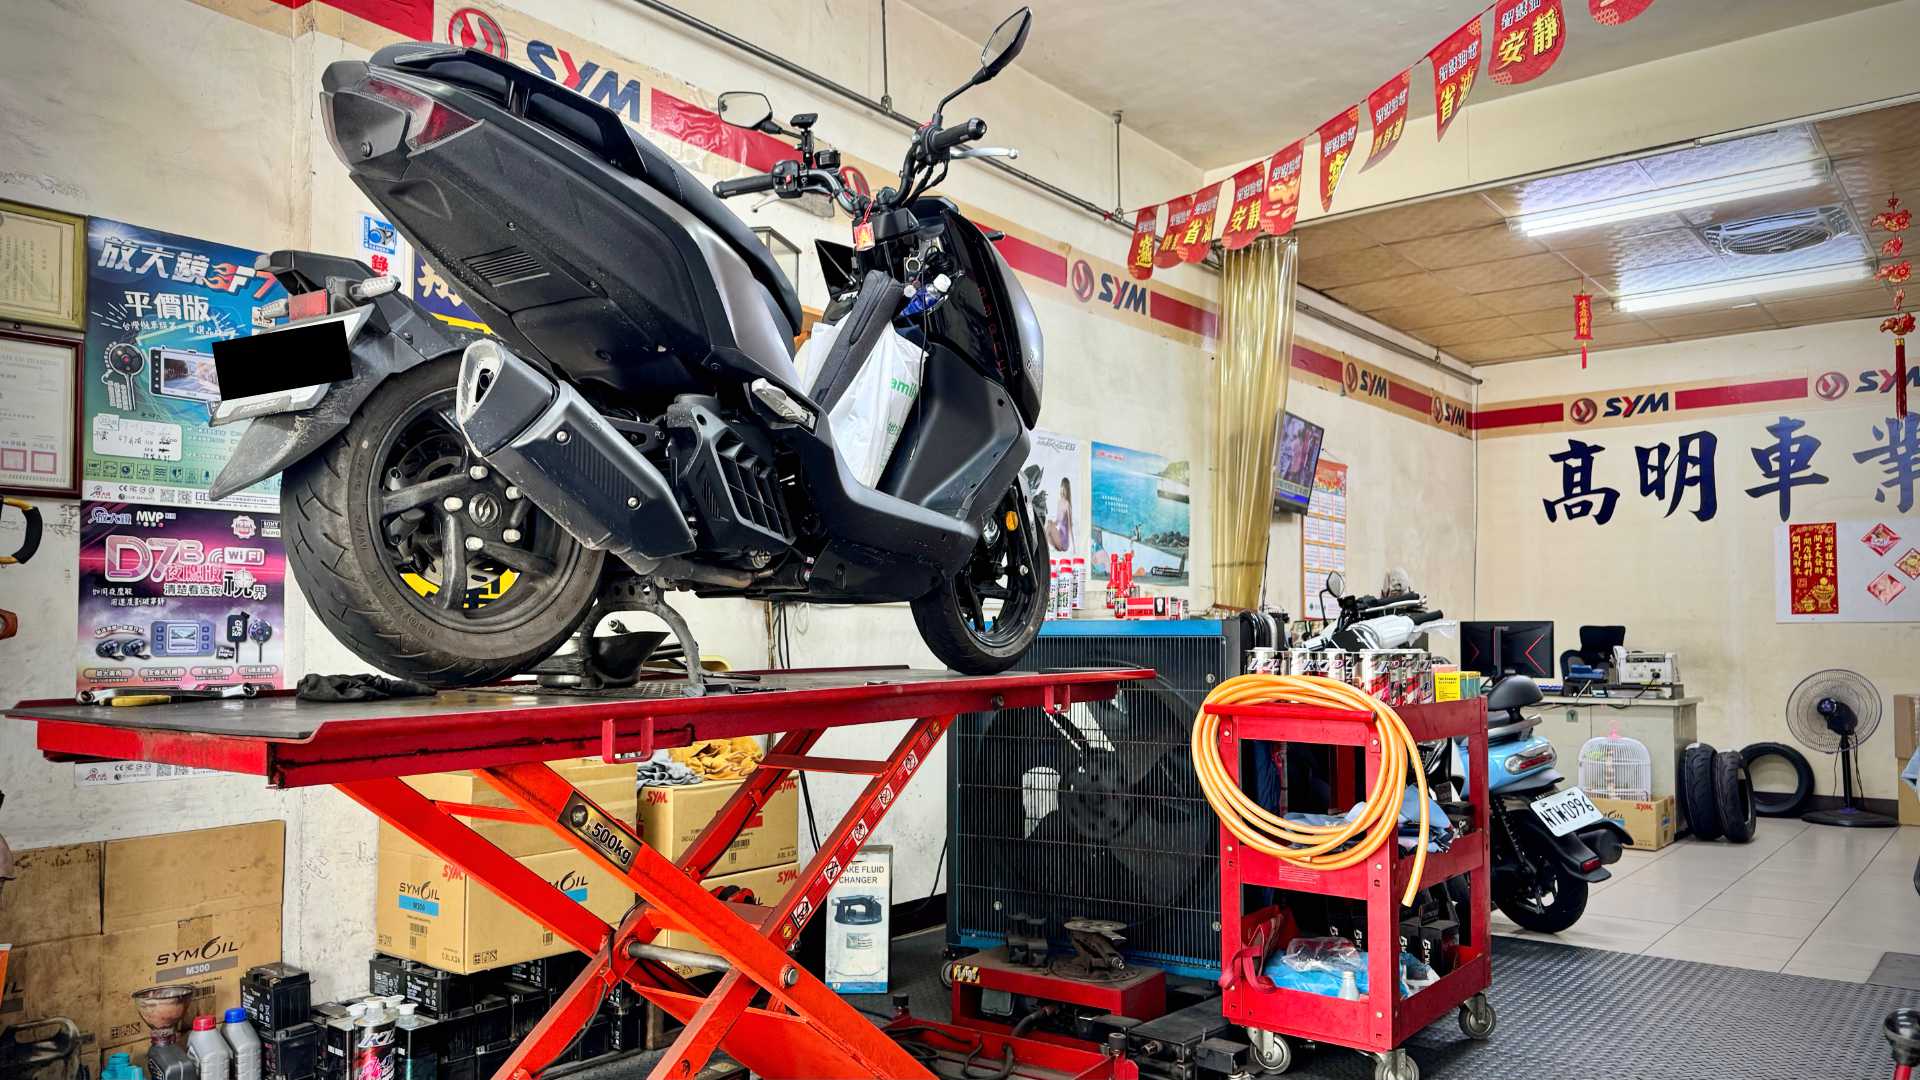 An SYM MMBCU scooter on a hoist in a mechanic workshop.